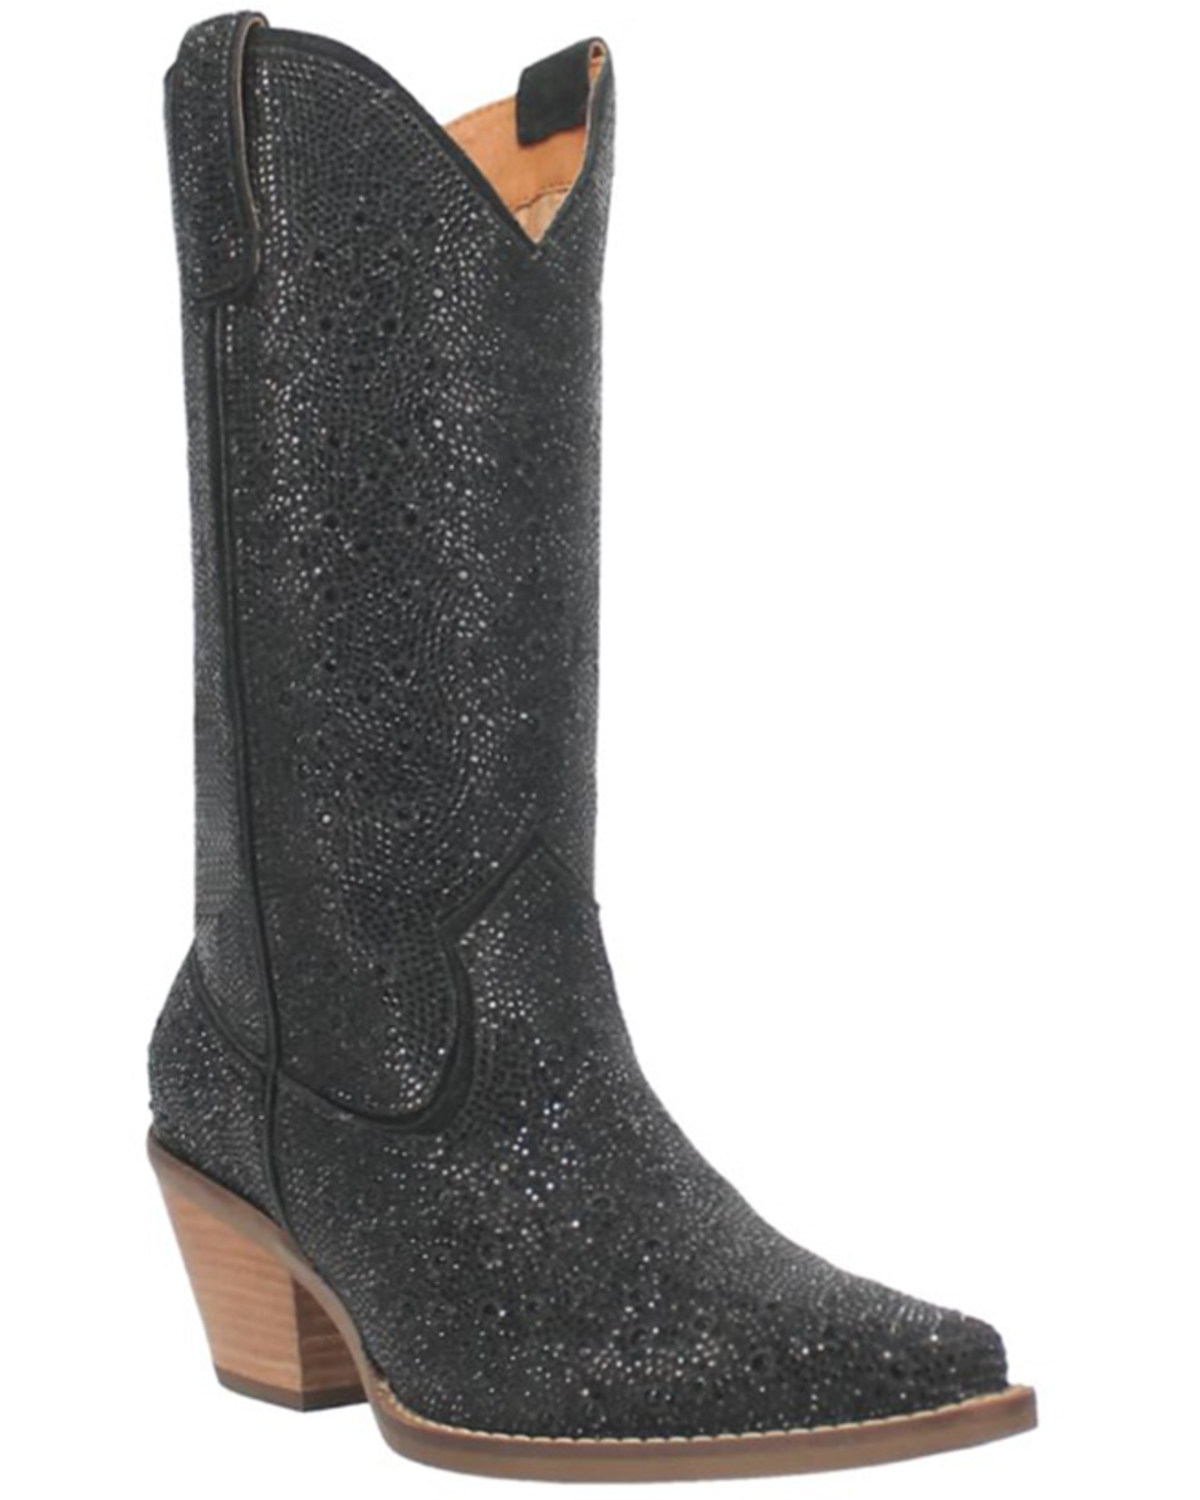 Dingo Women's Dollar Western Boots - Pointed Toe